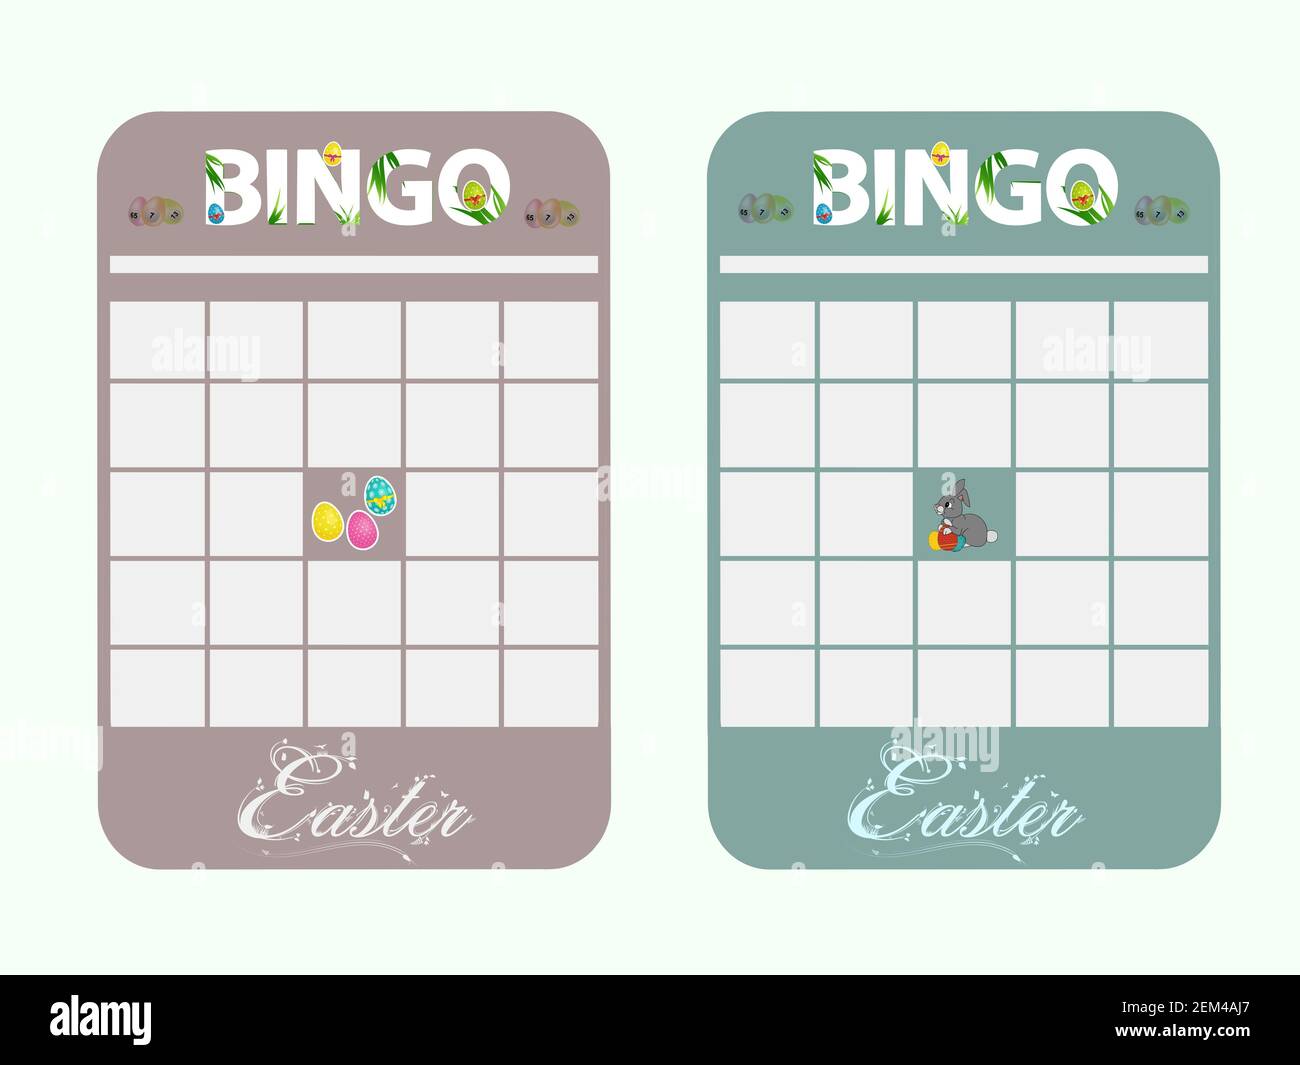 Blank Copy Space Easter Bingo Cards Decorated With Bunny Easter Eggs And Text In Light Green And Light Brown Stock Photo